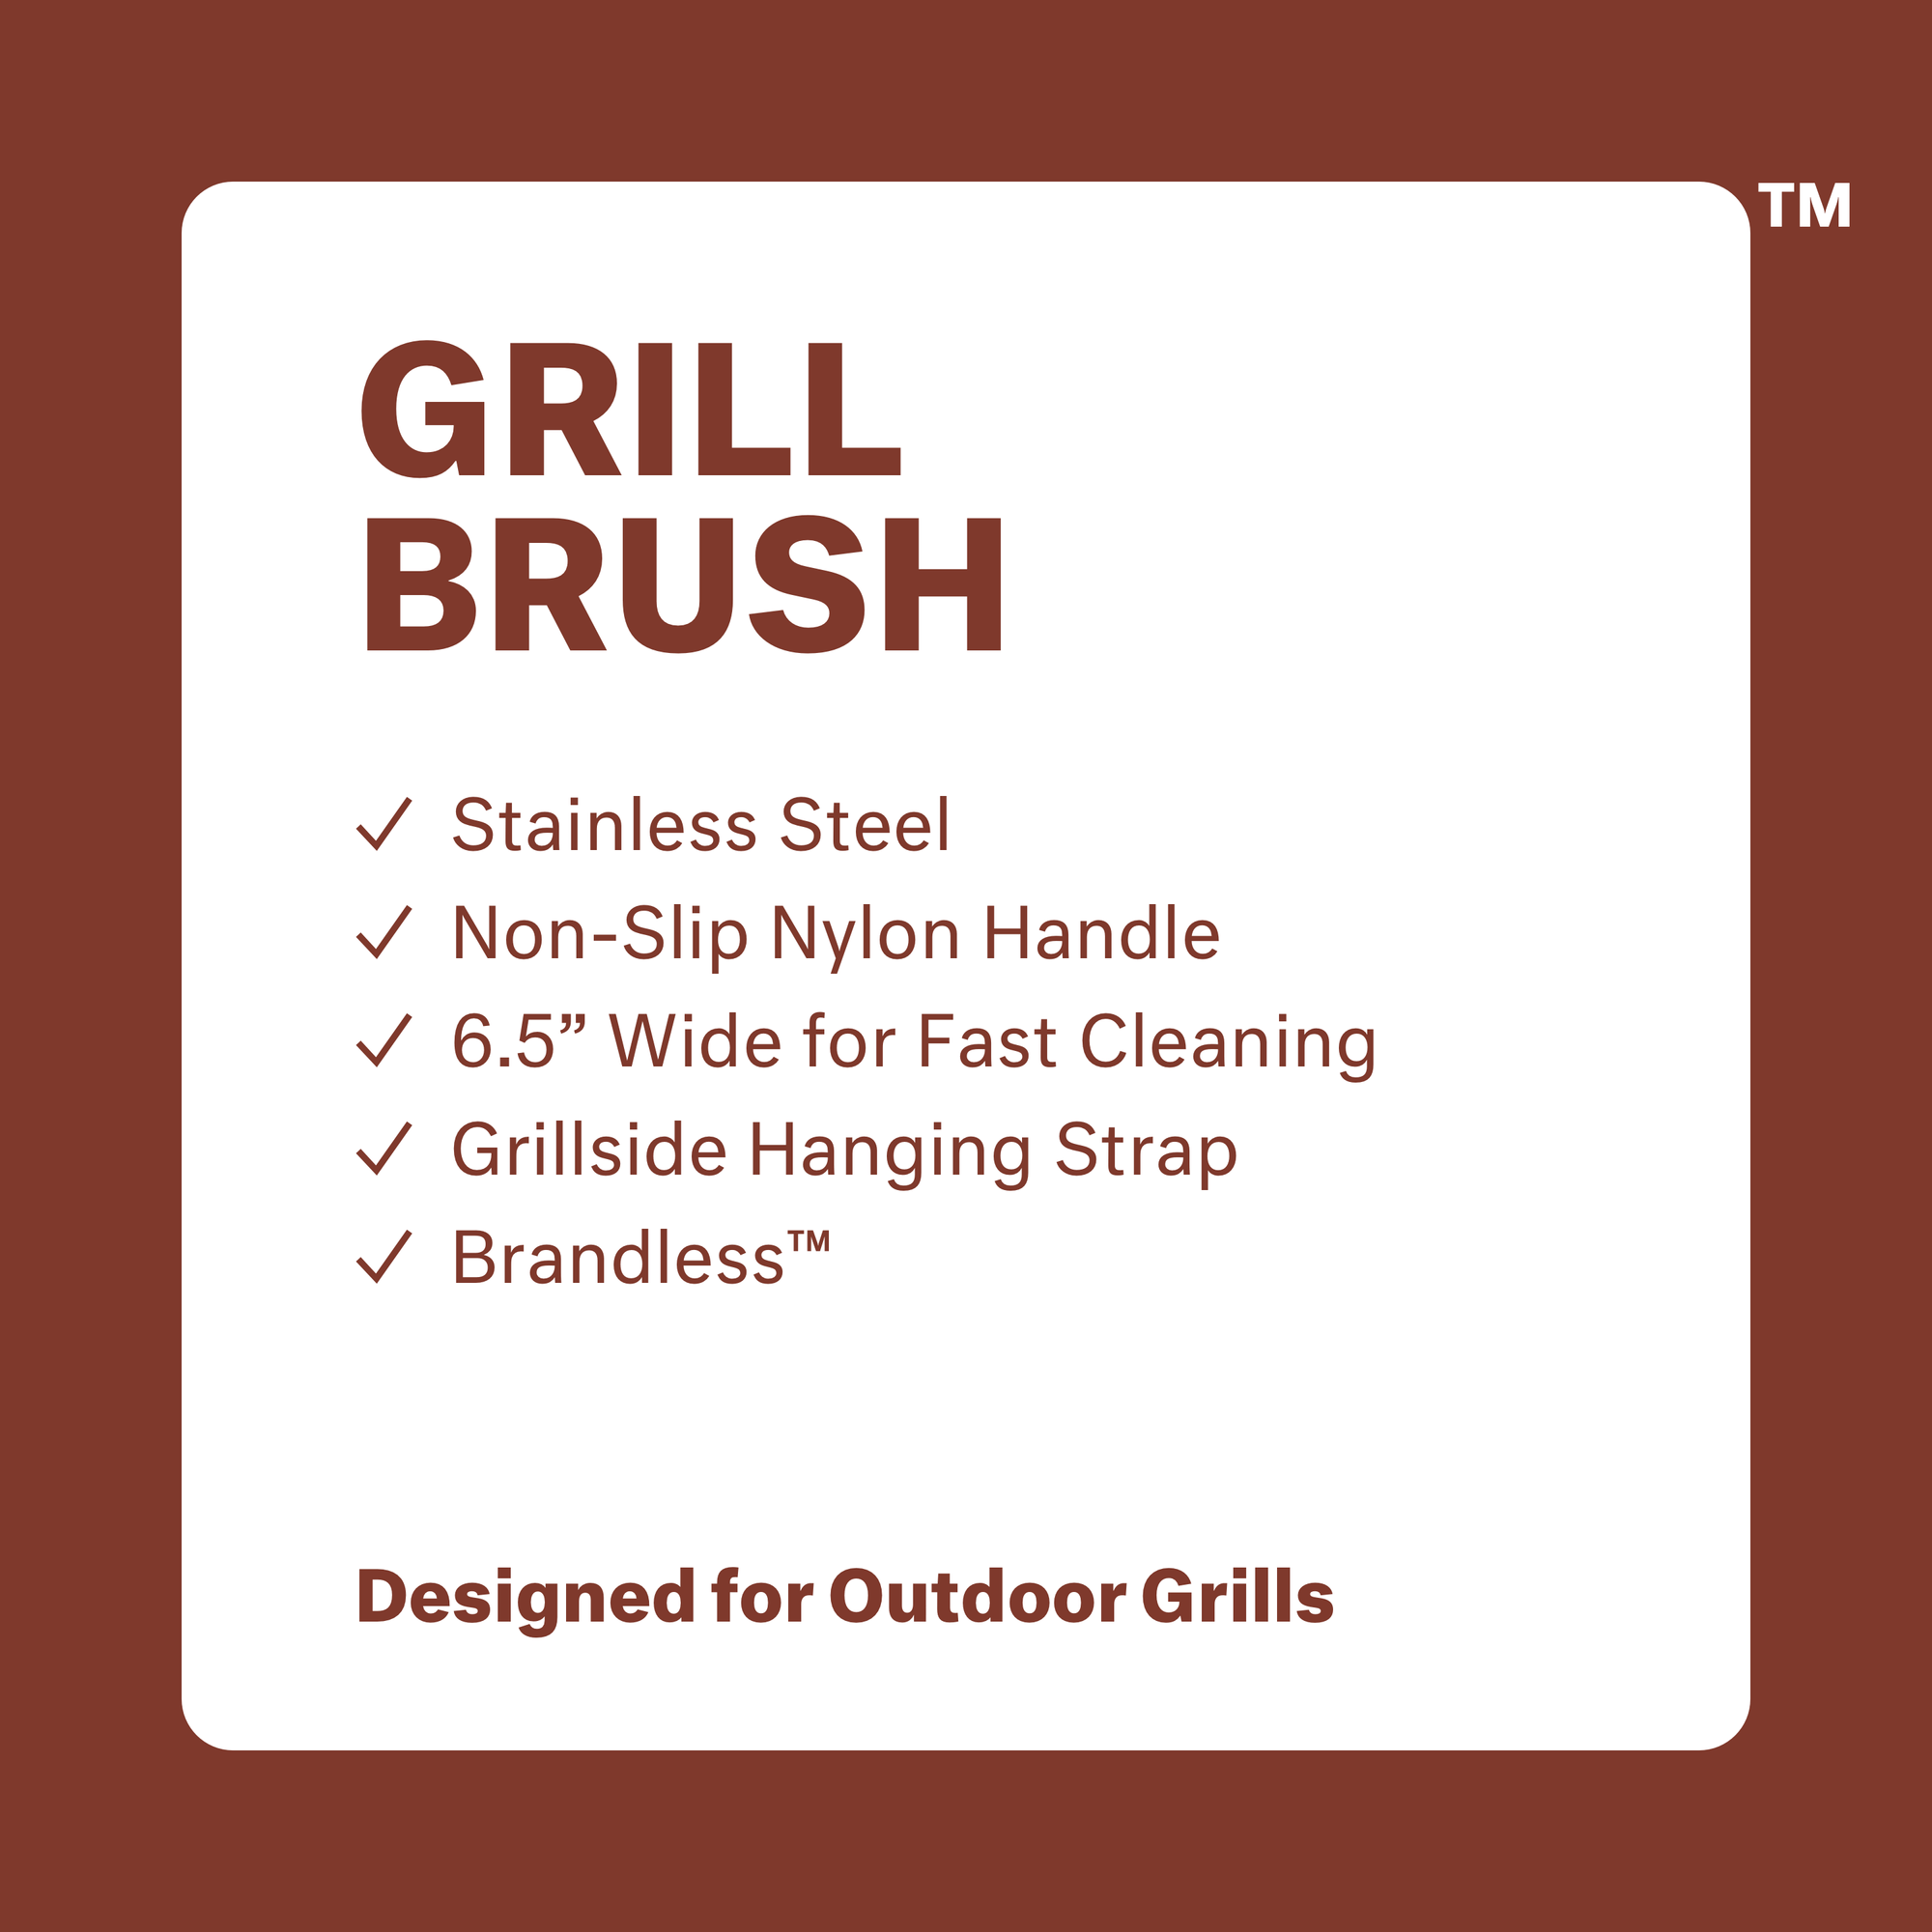 Grill Brush. Stainless steel. Non-slip nylon handle. 6.5" wide for fast cleaning. Grillside hanging strap. Brandless. Designed for outdoor grills.